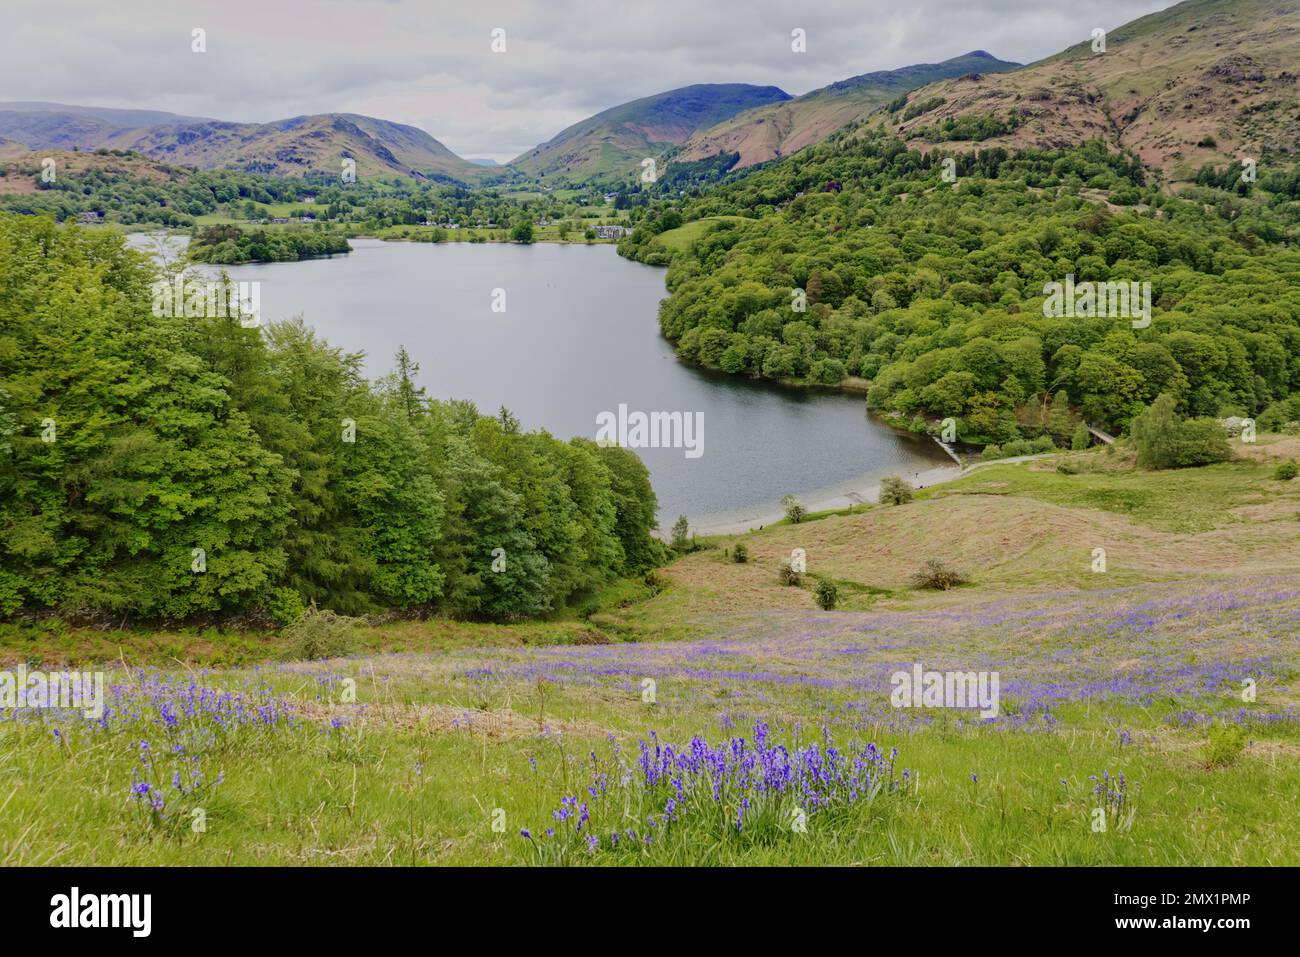 Lake District, Cumbria, UK - View from the Elterwater to Grasmere footpath in spring looking down a grassy bank covered in bluebells to Grasmere lake Stock Photo